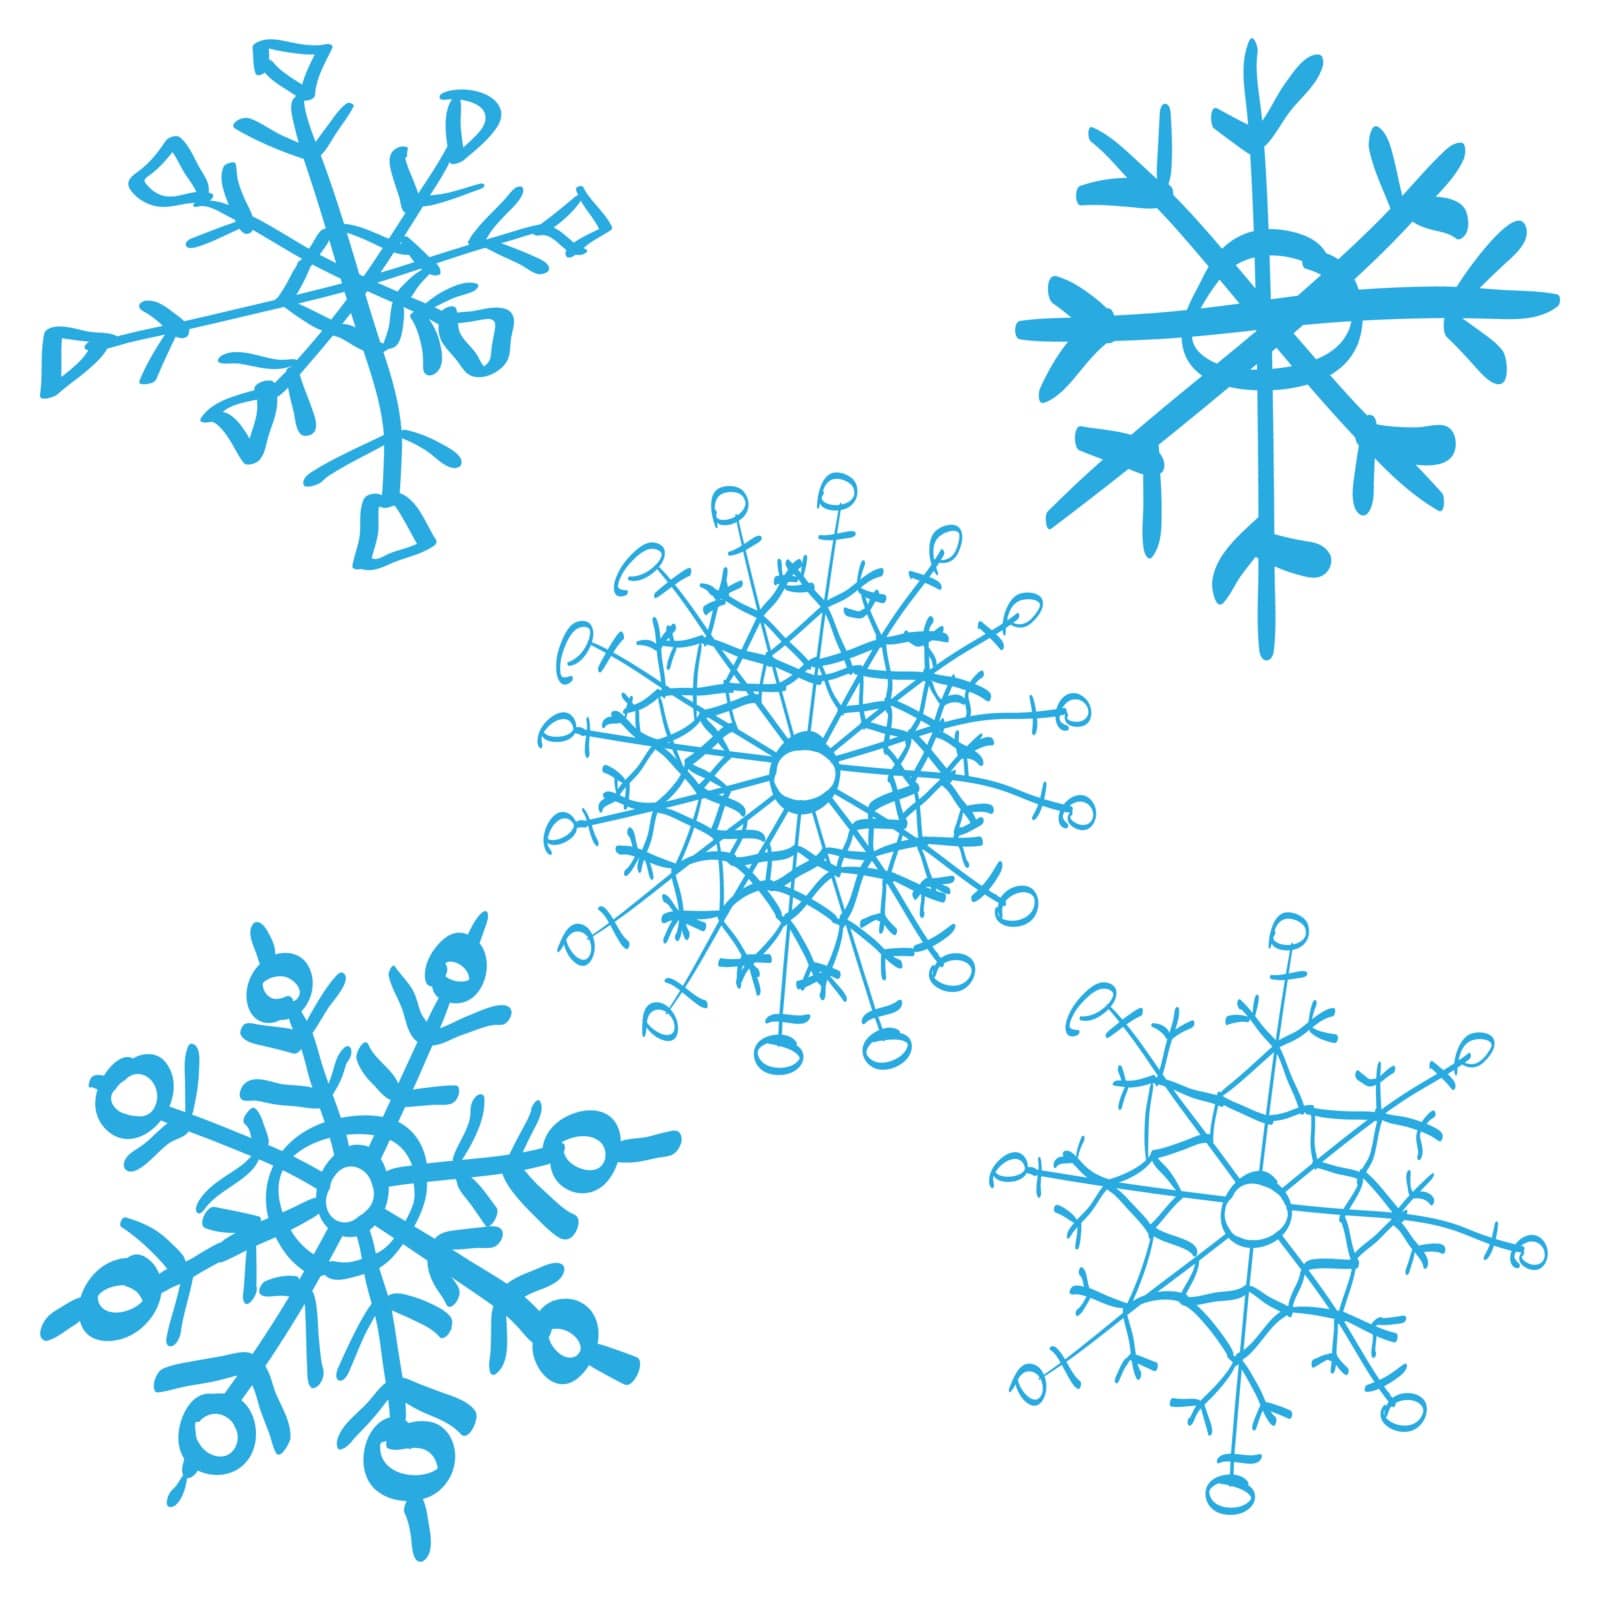 Blue handdrawn snowflake isolated on white background. Flat icon with christmas and winter theme. Simple snow symbol illustration. by Asnia